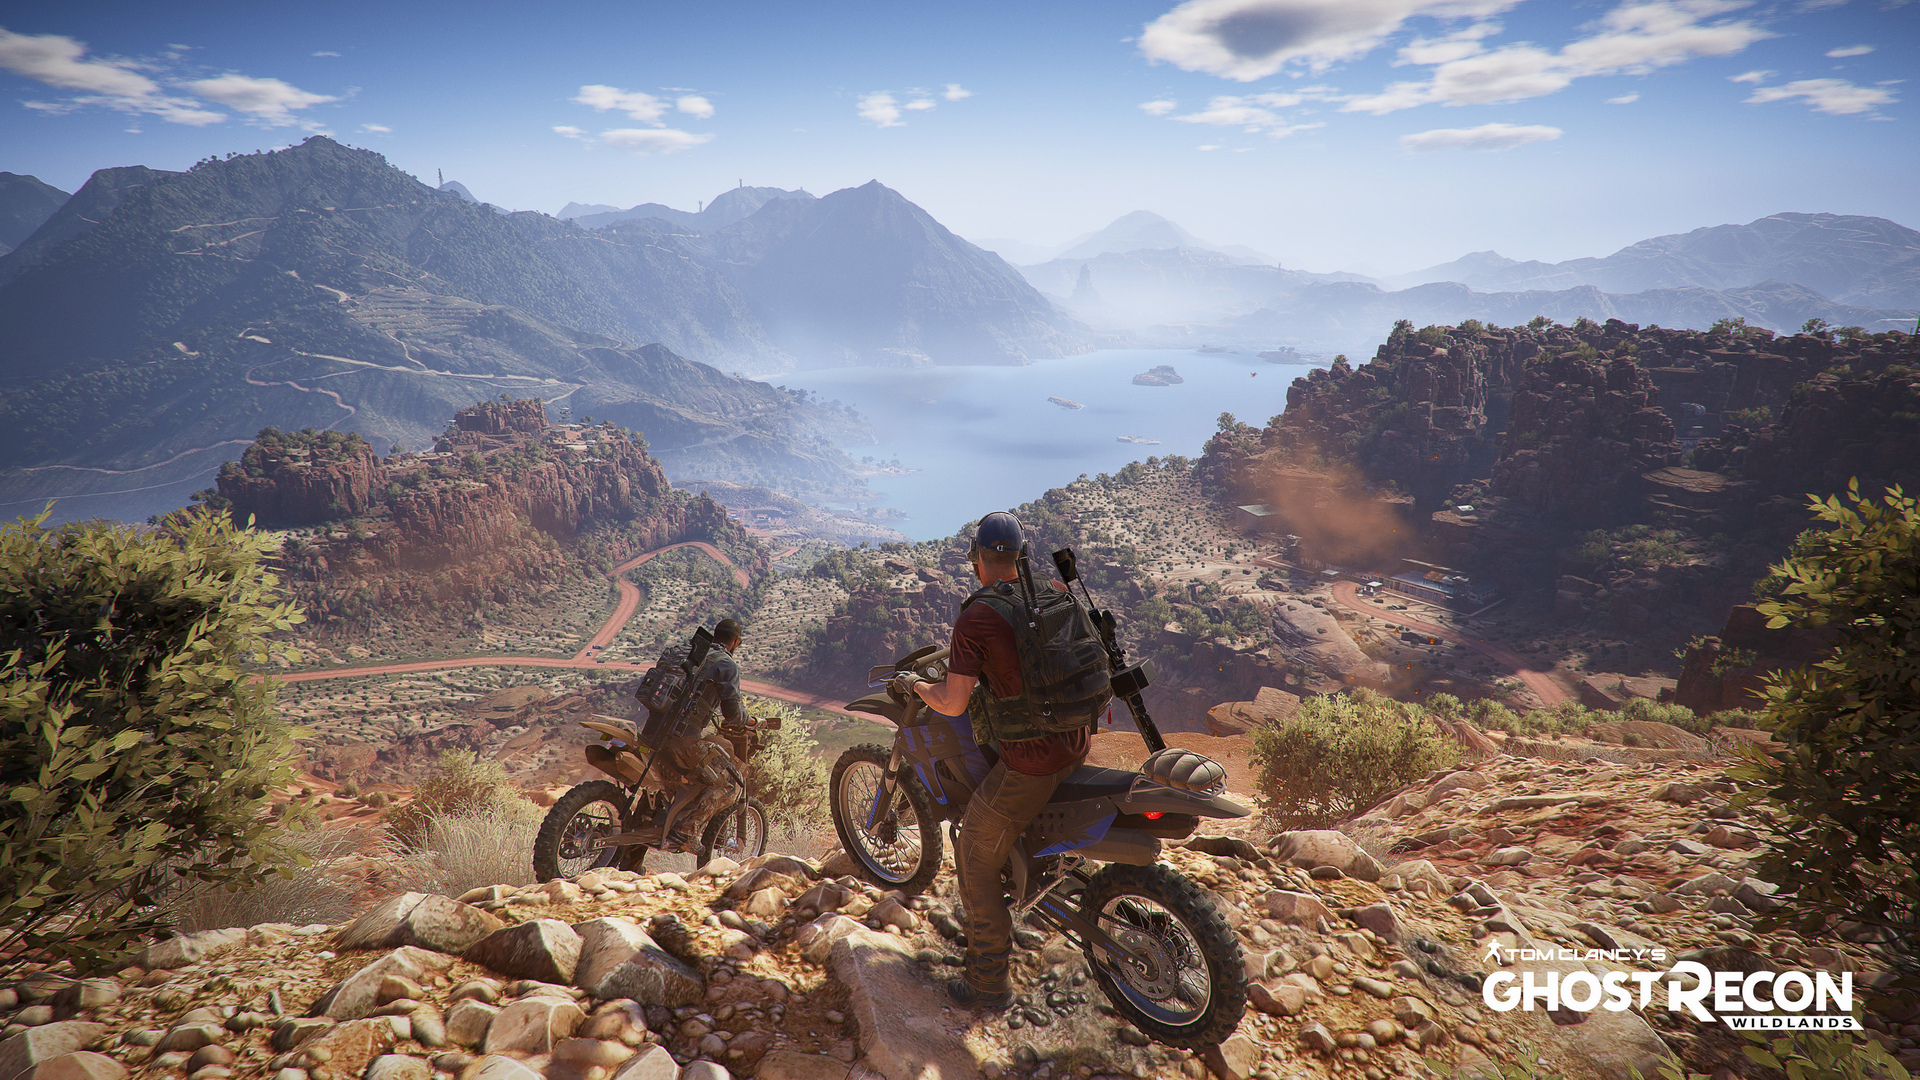 Ghost Recon Wildlands Patch 3 5 Available Allows Players To Request For Help While In Down State